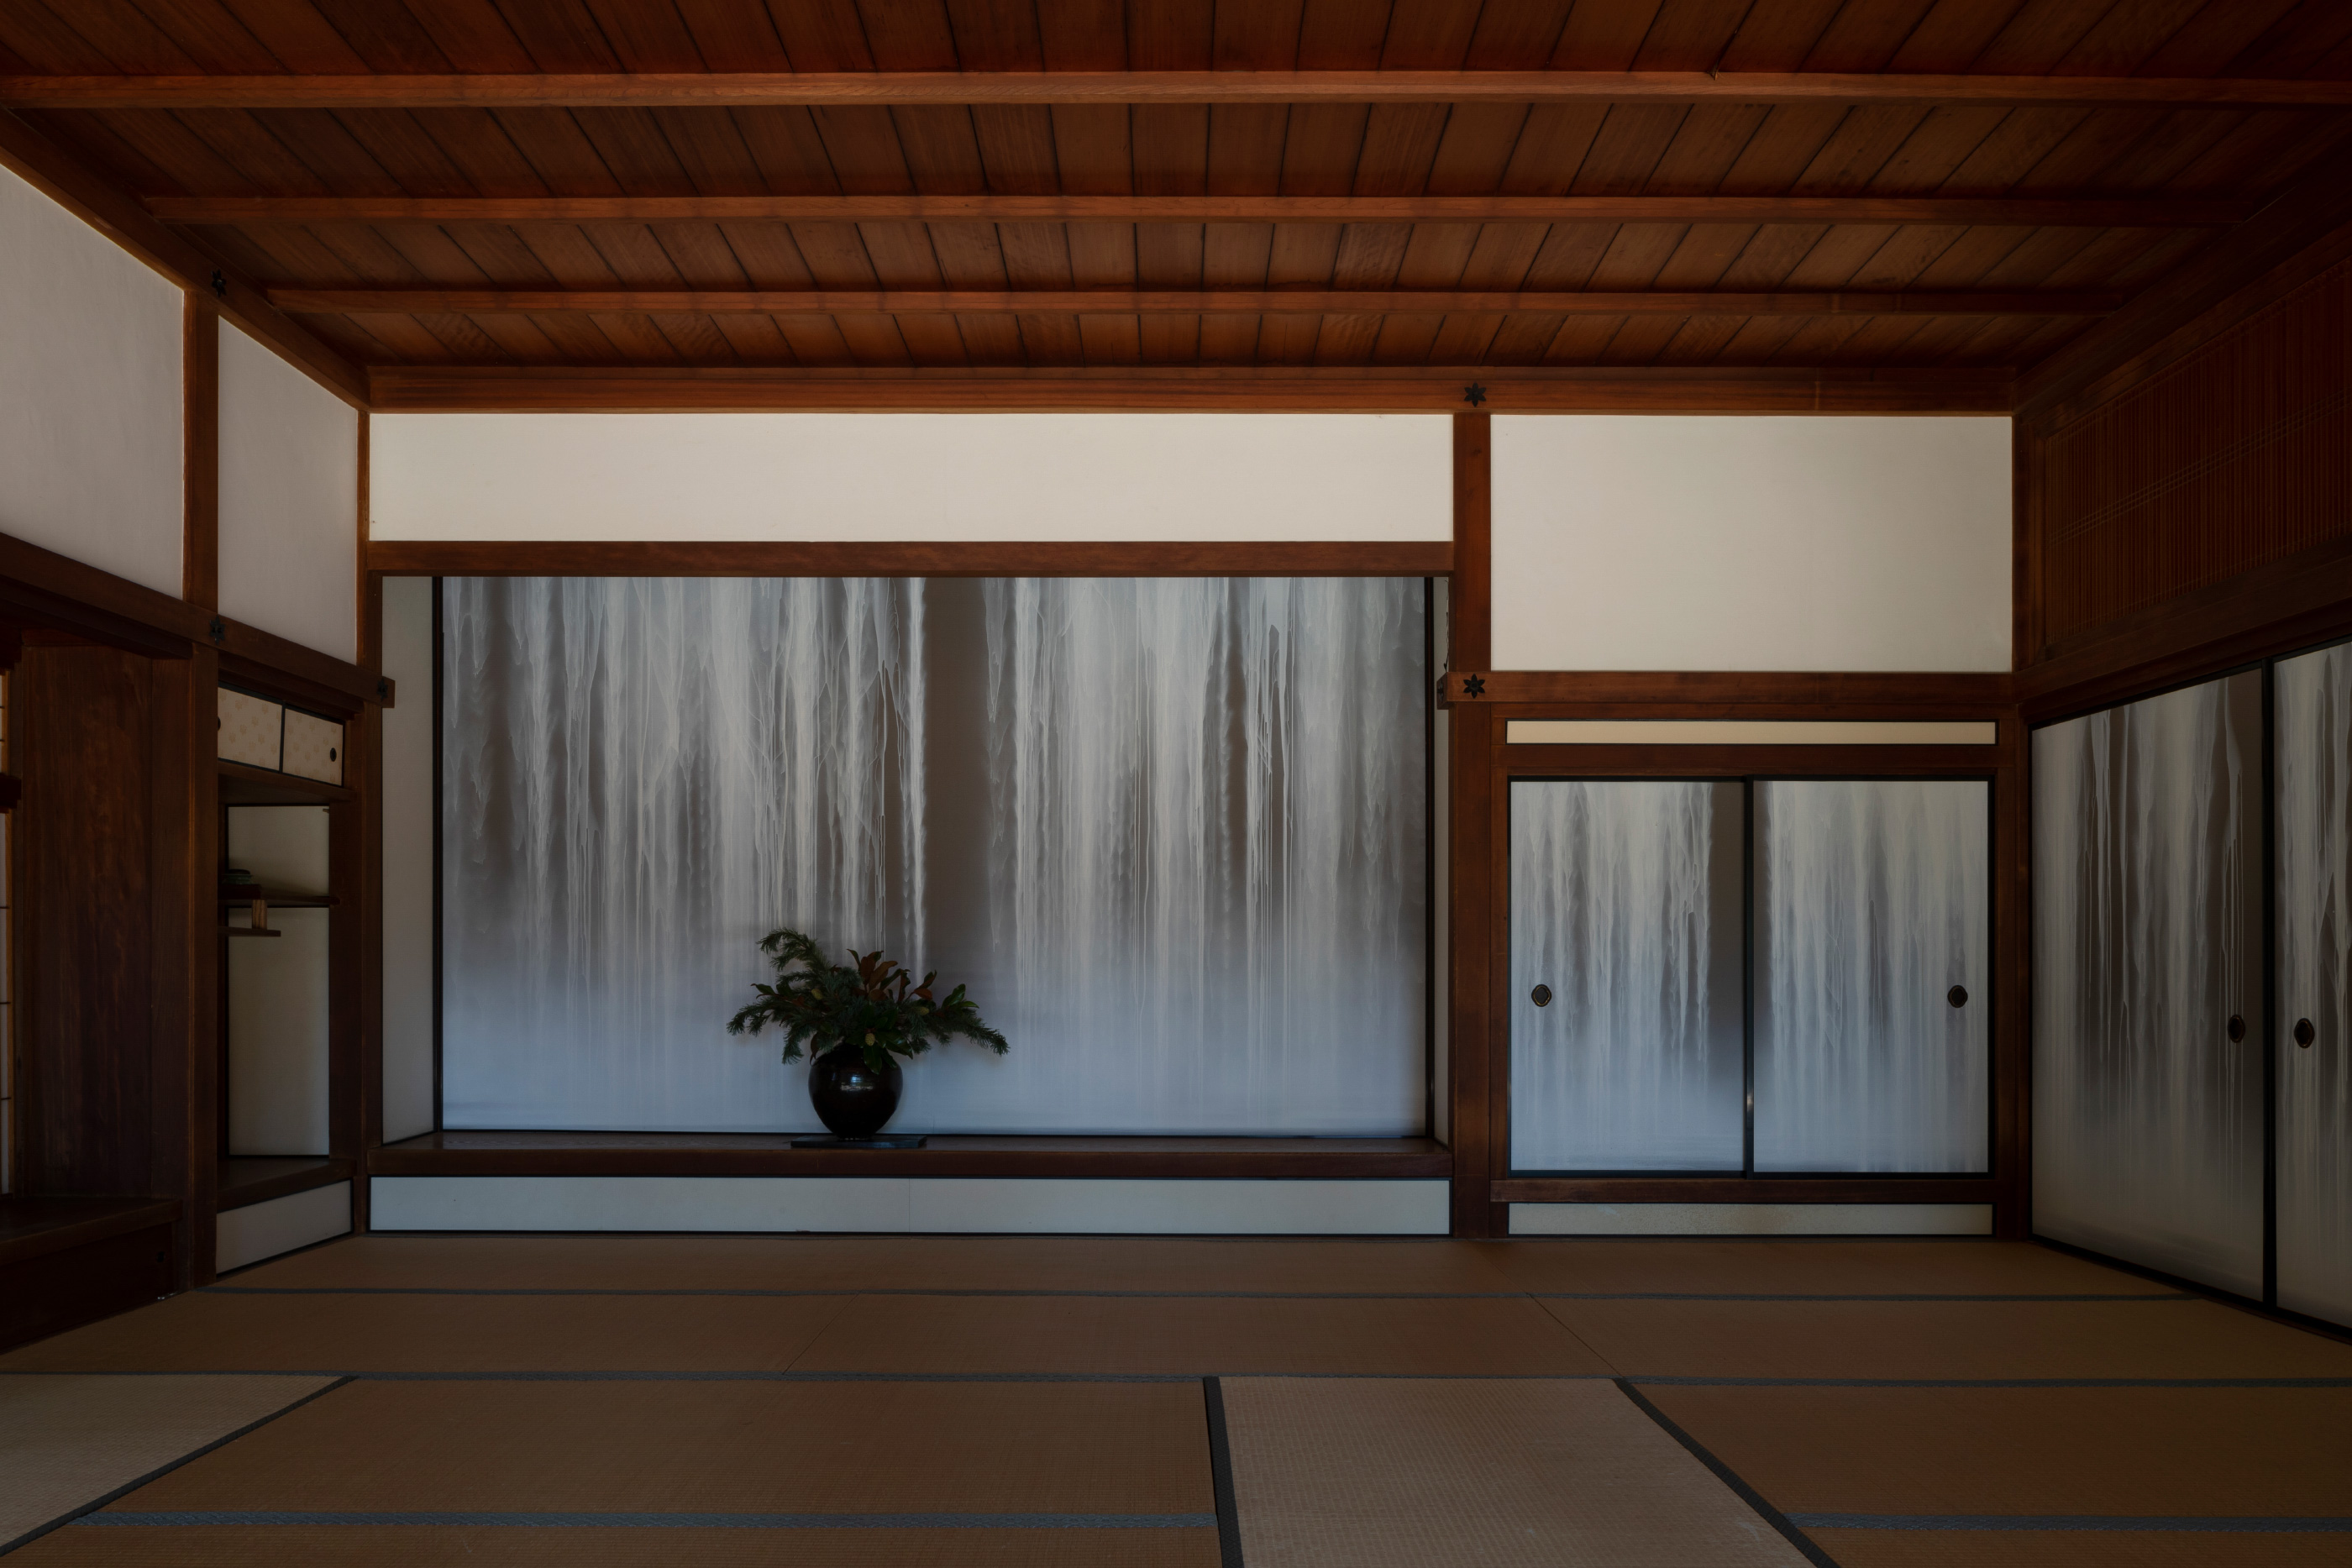 The interior of a 17th-century-style home, without the Shofuso and Modernism show